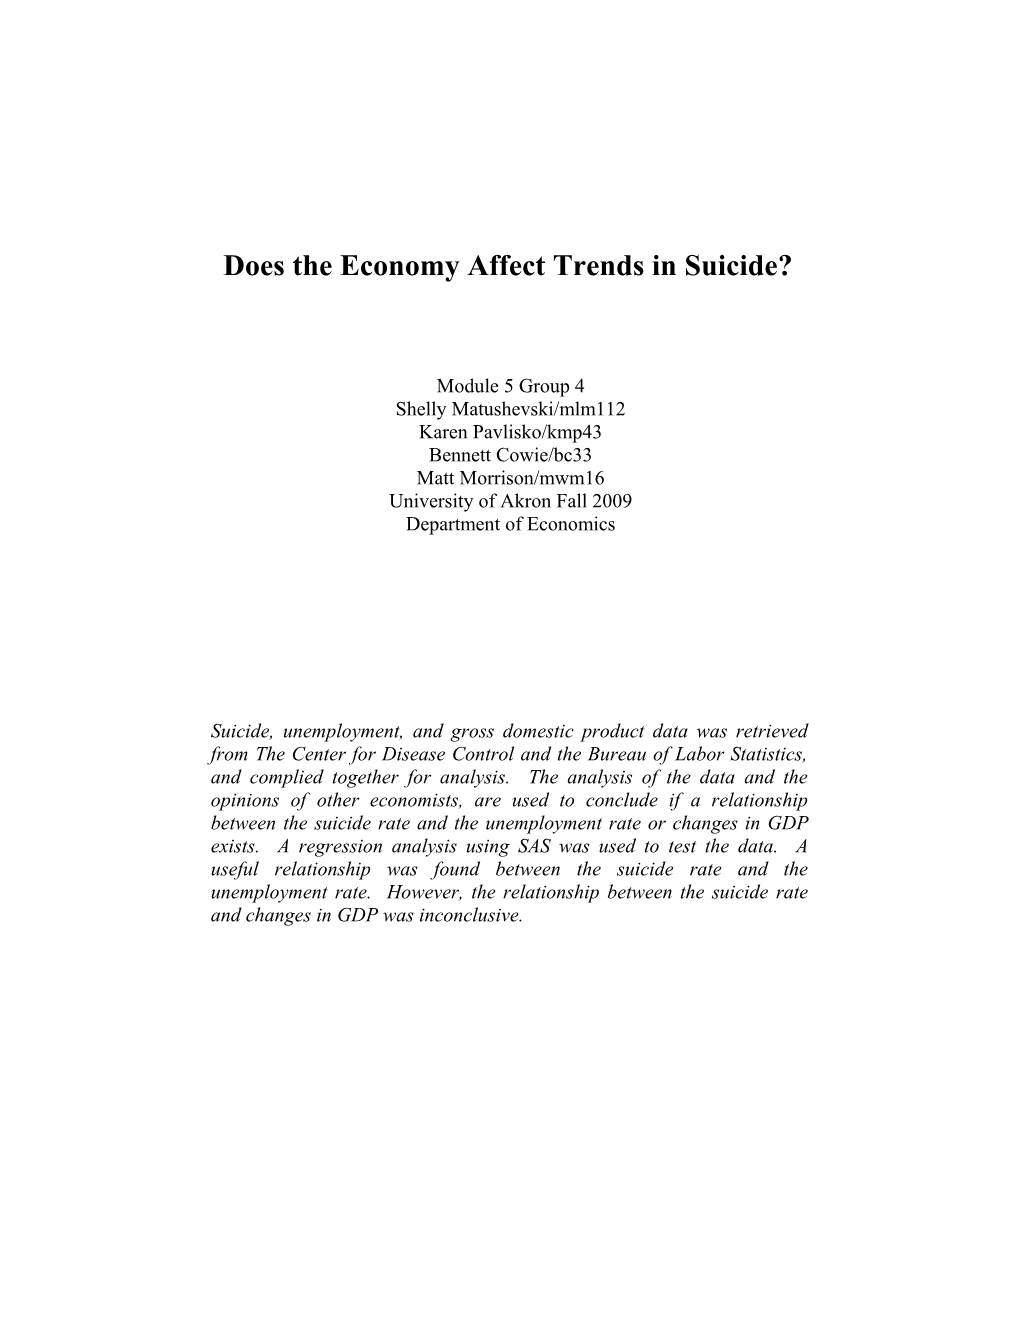 Does the Economy Affect Trends in Suicide?